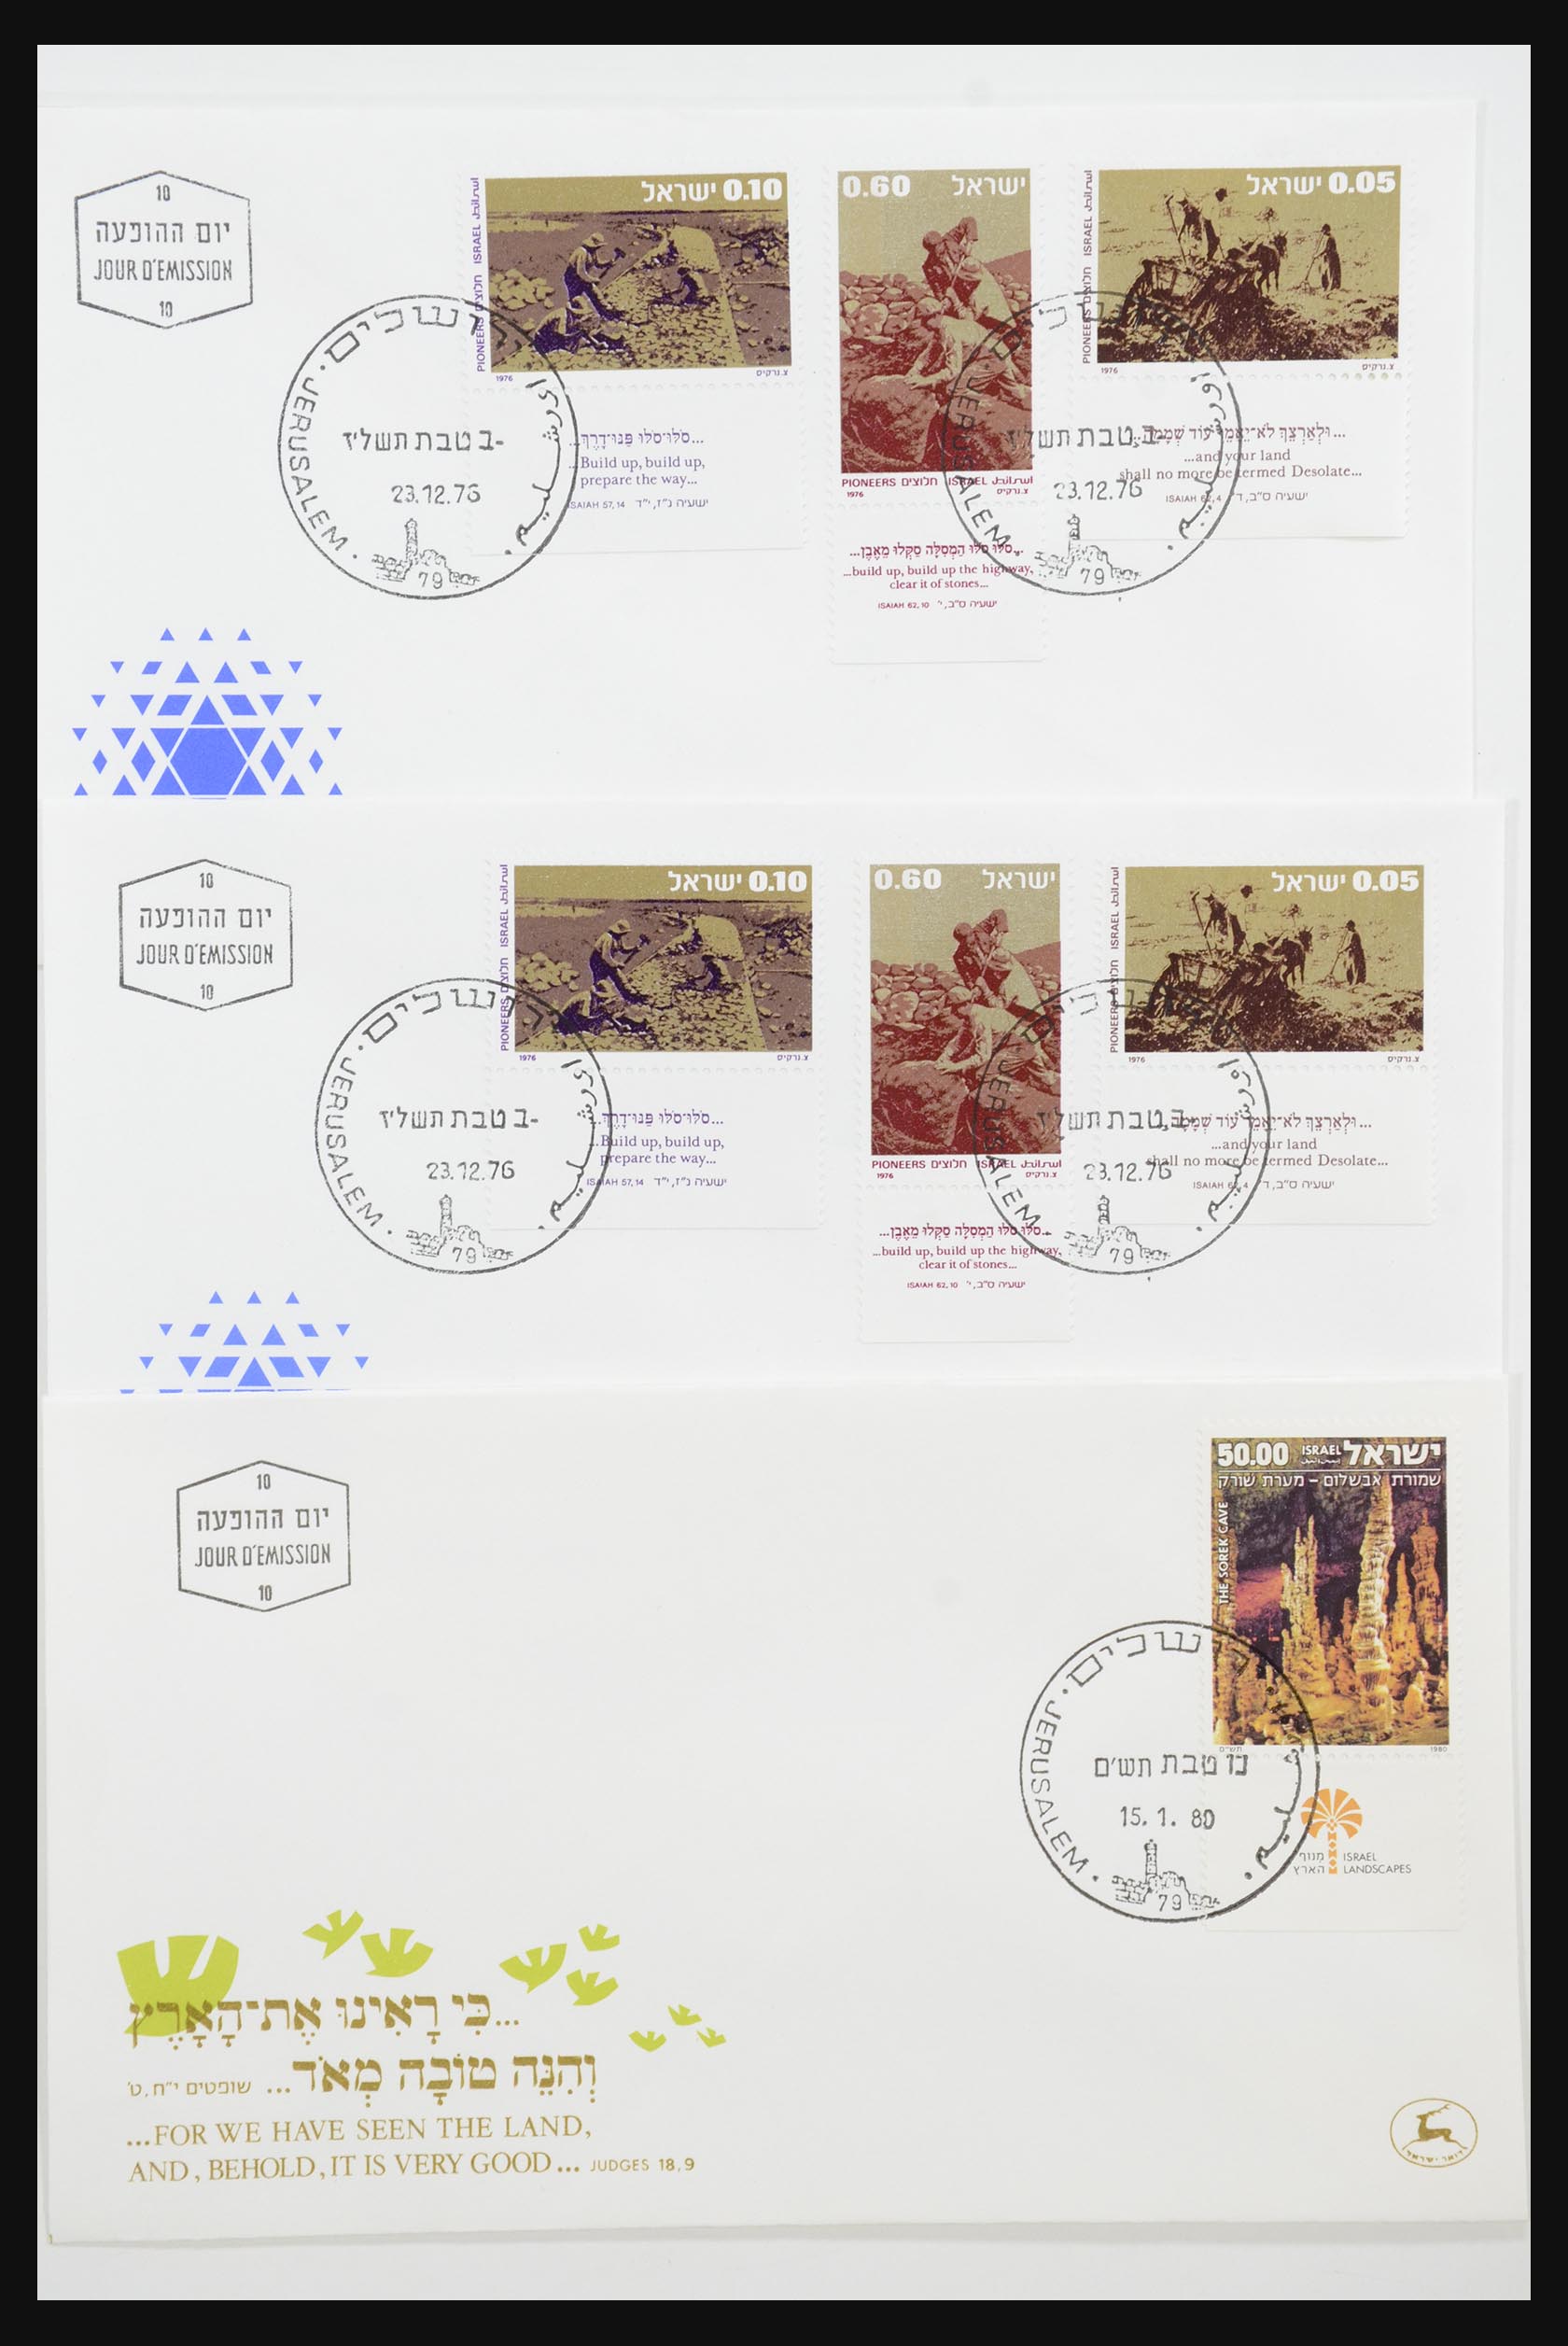 31924 004 - 31924 Israel first day cover collection 1957-2003.